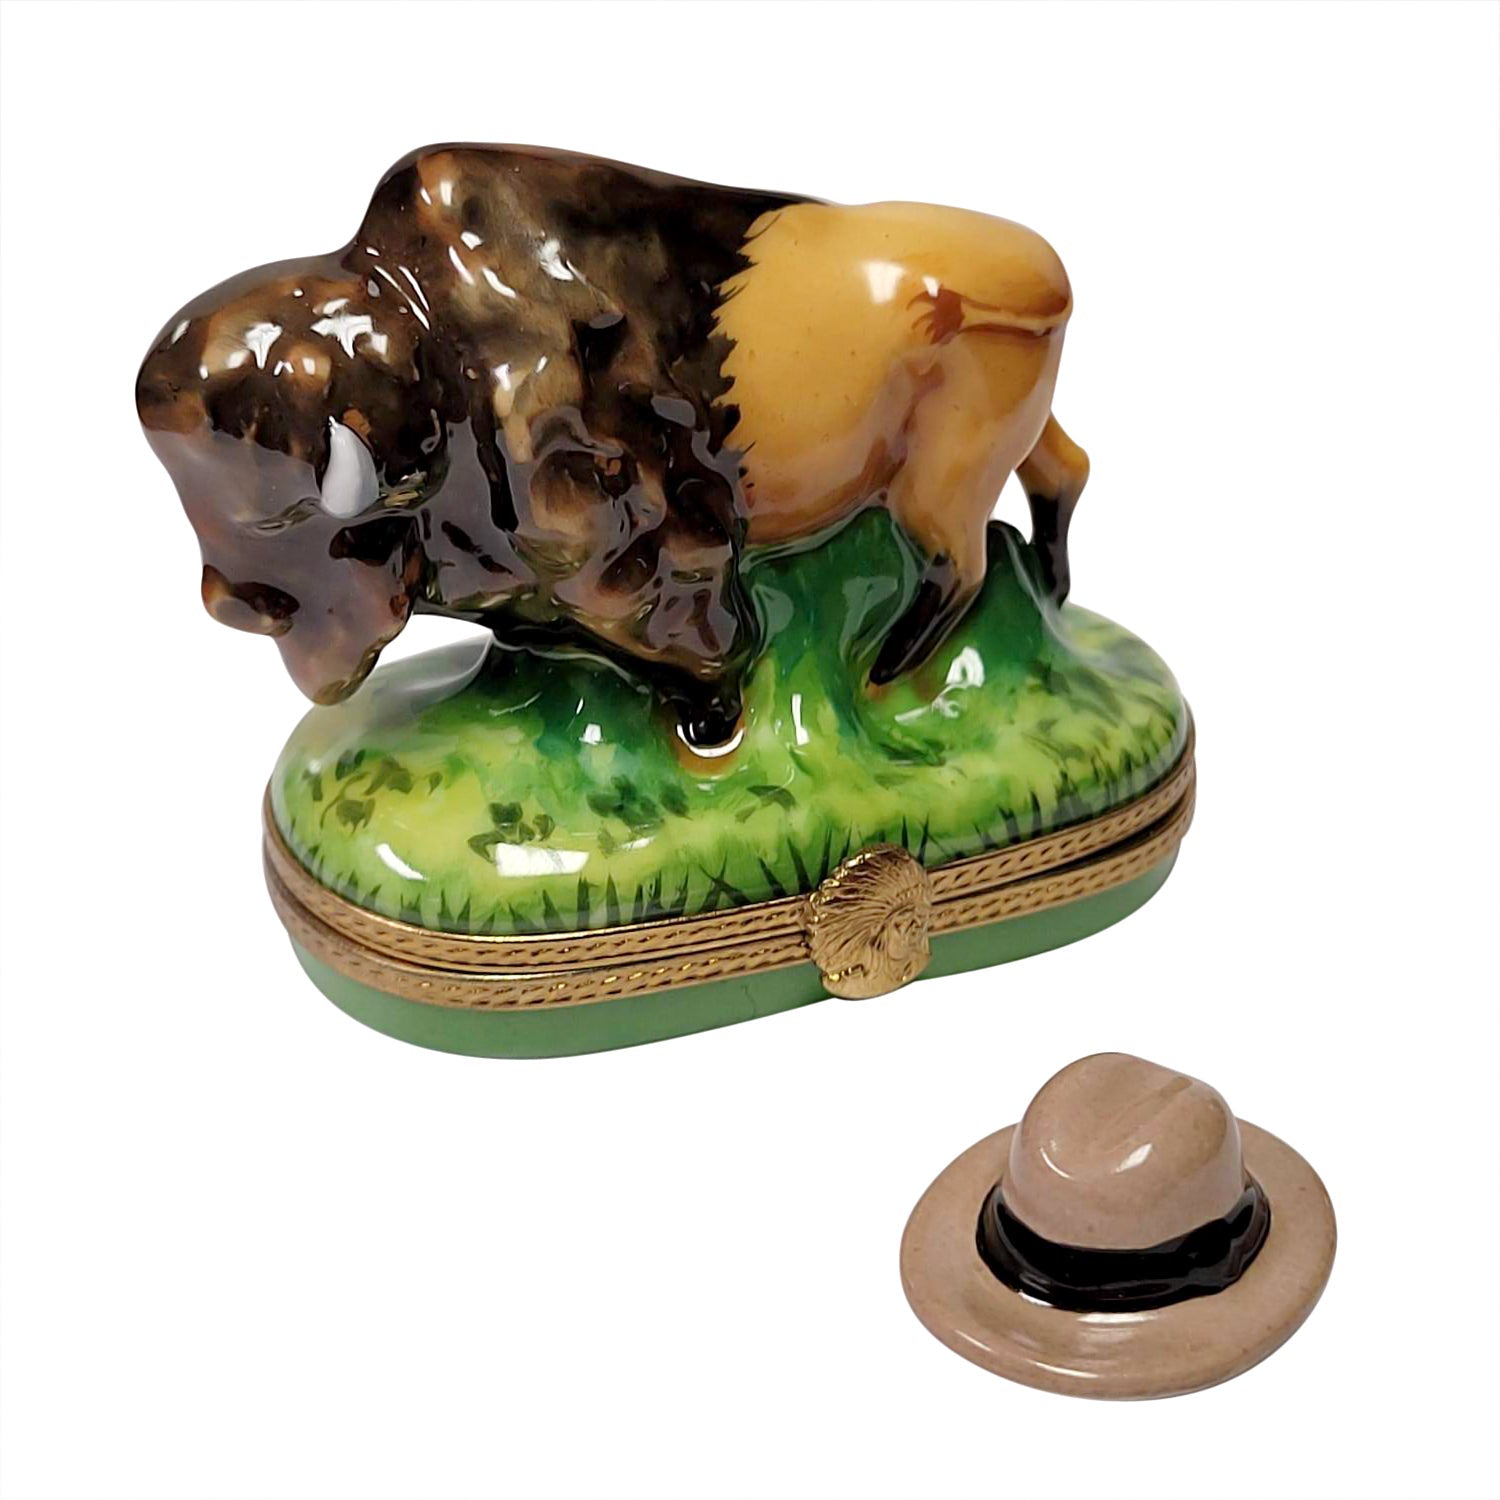 Standing Buffalo with Removable Cowboy Hat Limoges Porcelain Box